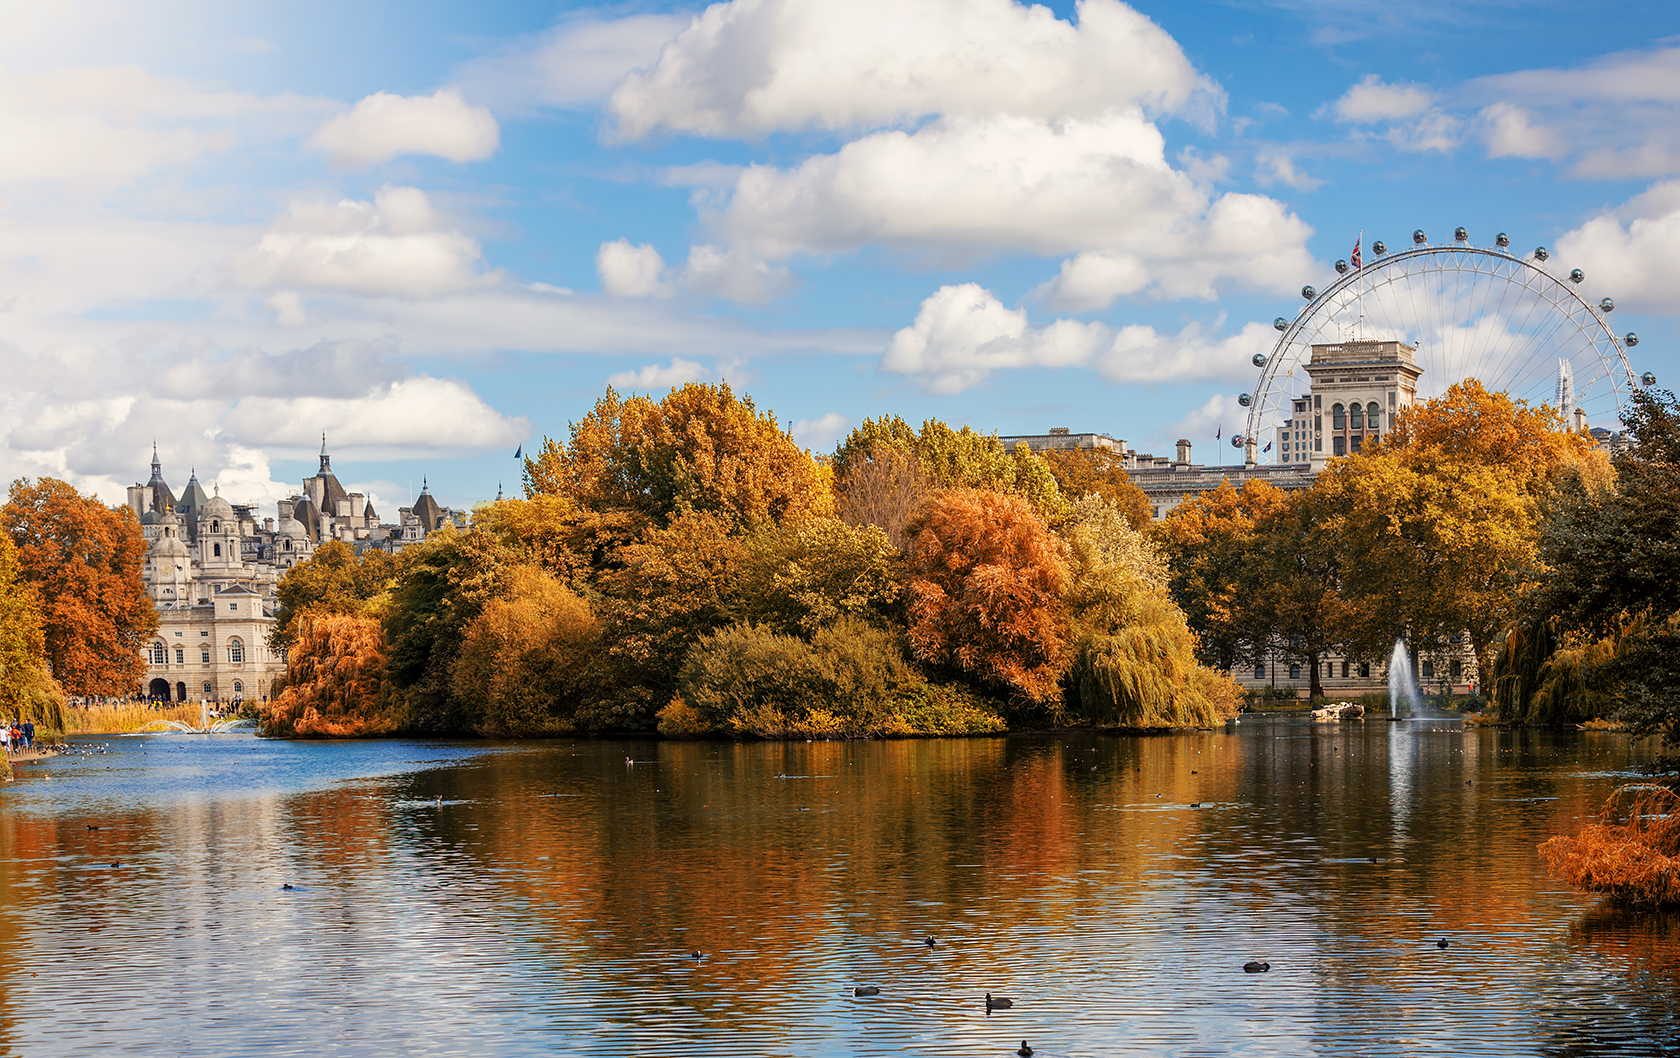 Discover a World of Art this Autumn in London